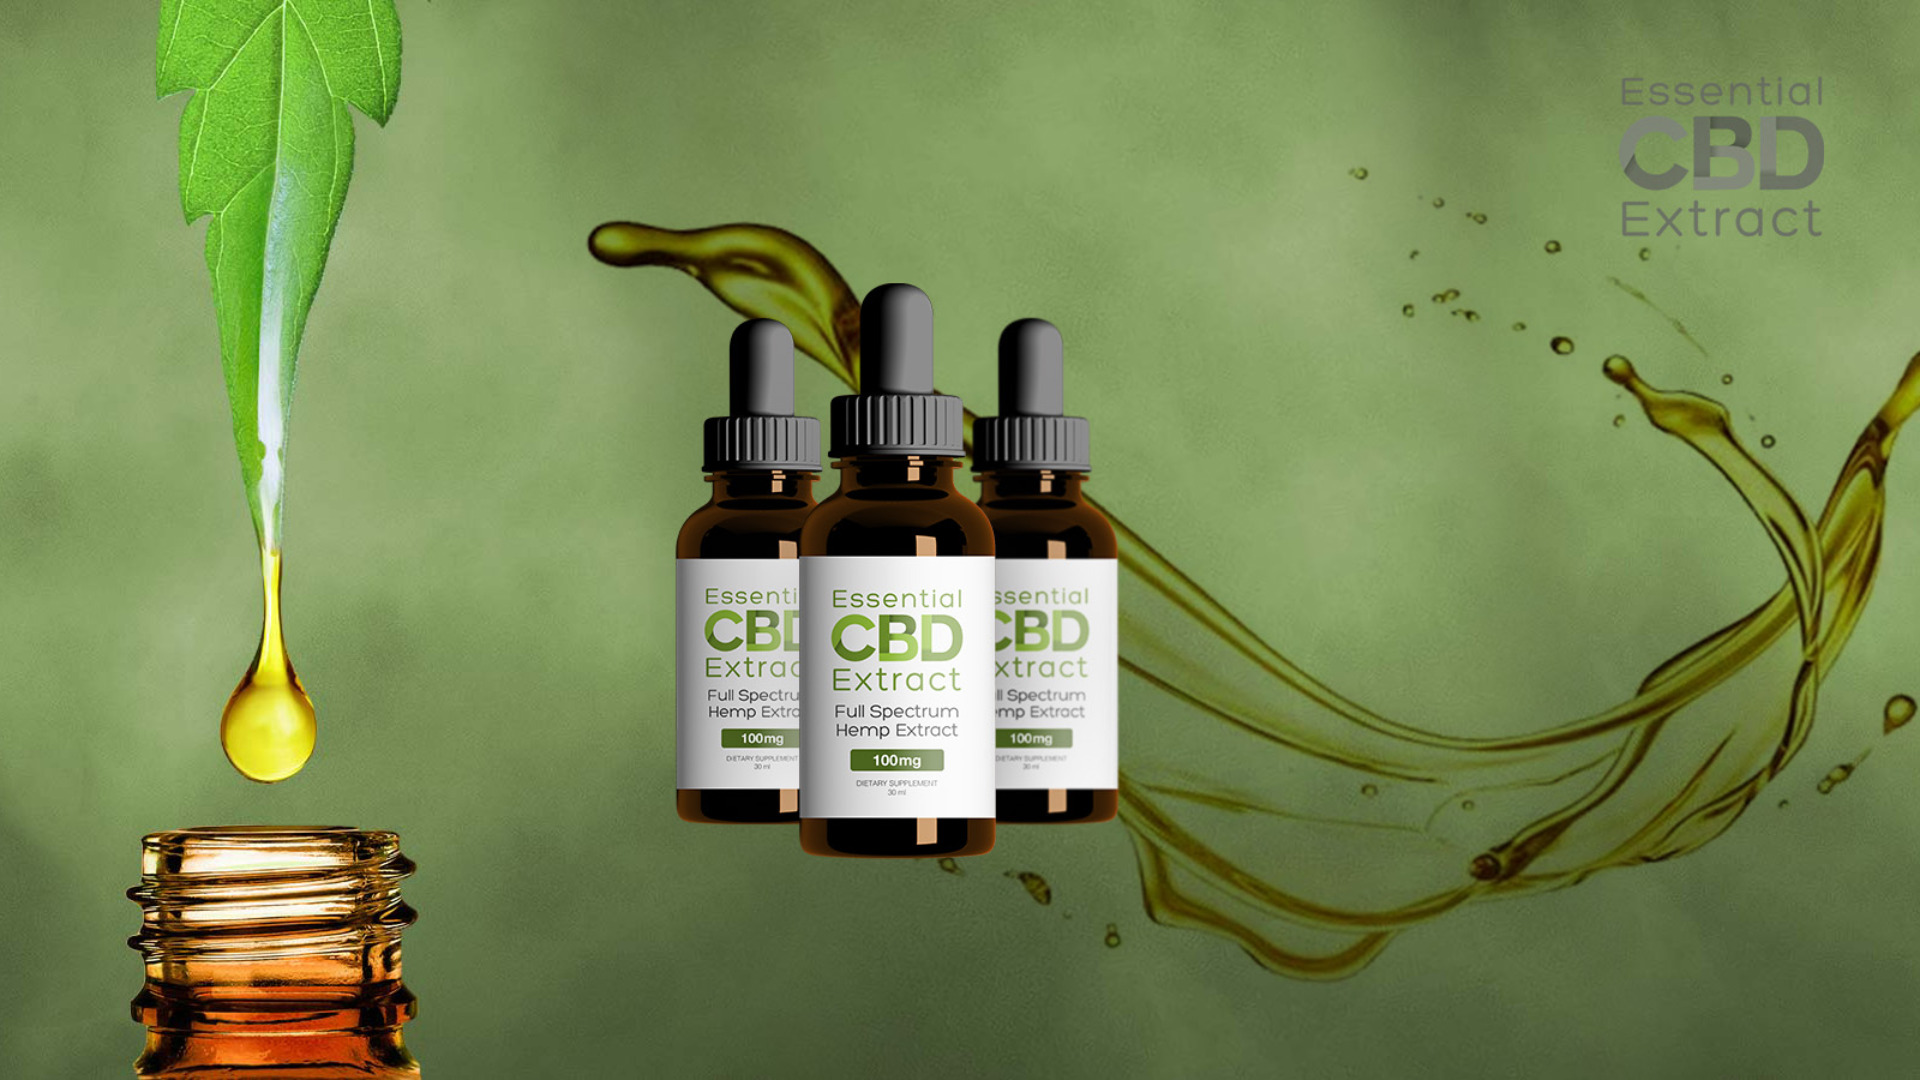 Essential CBD Extract Australia ndash; Limited Offers Available Online